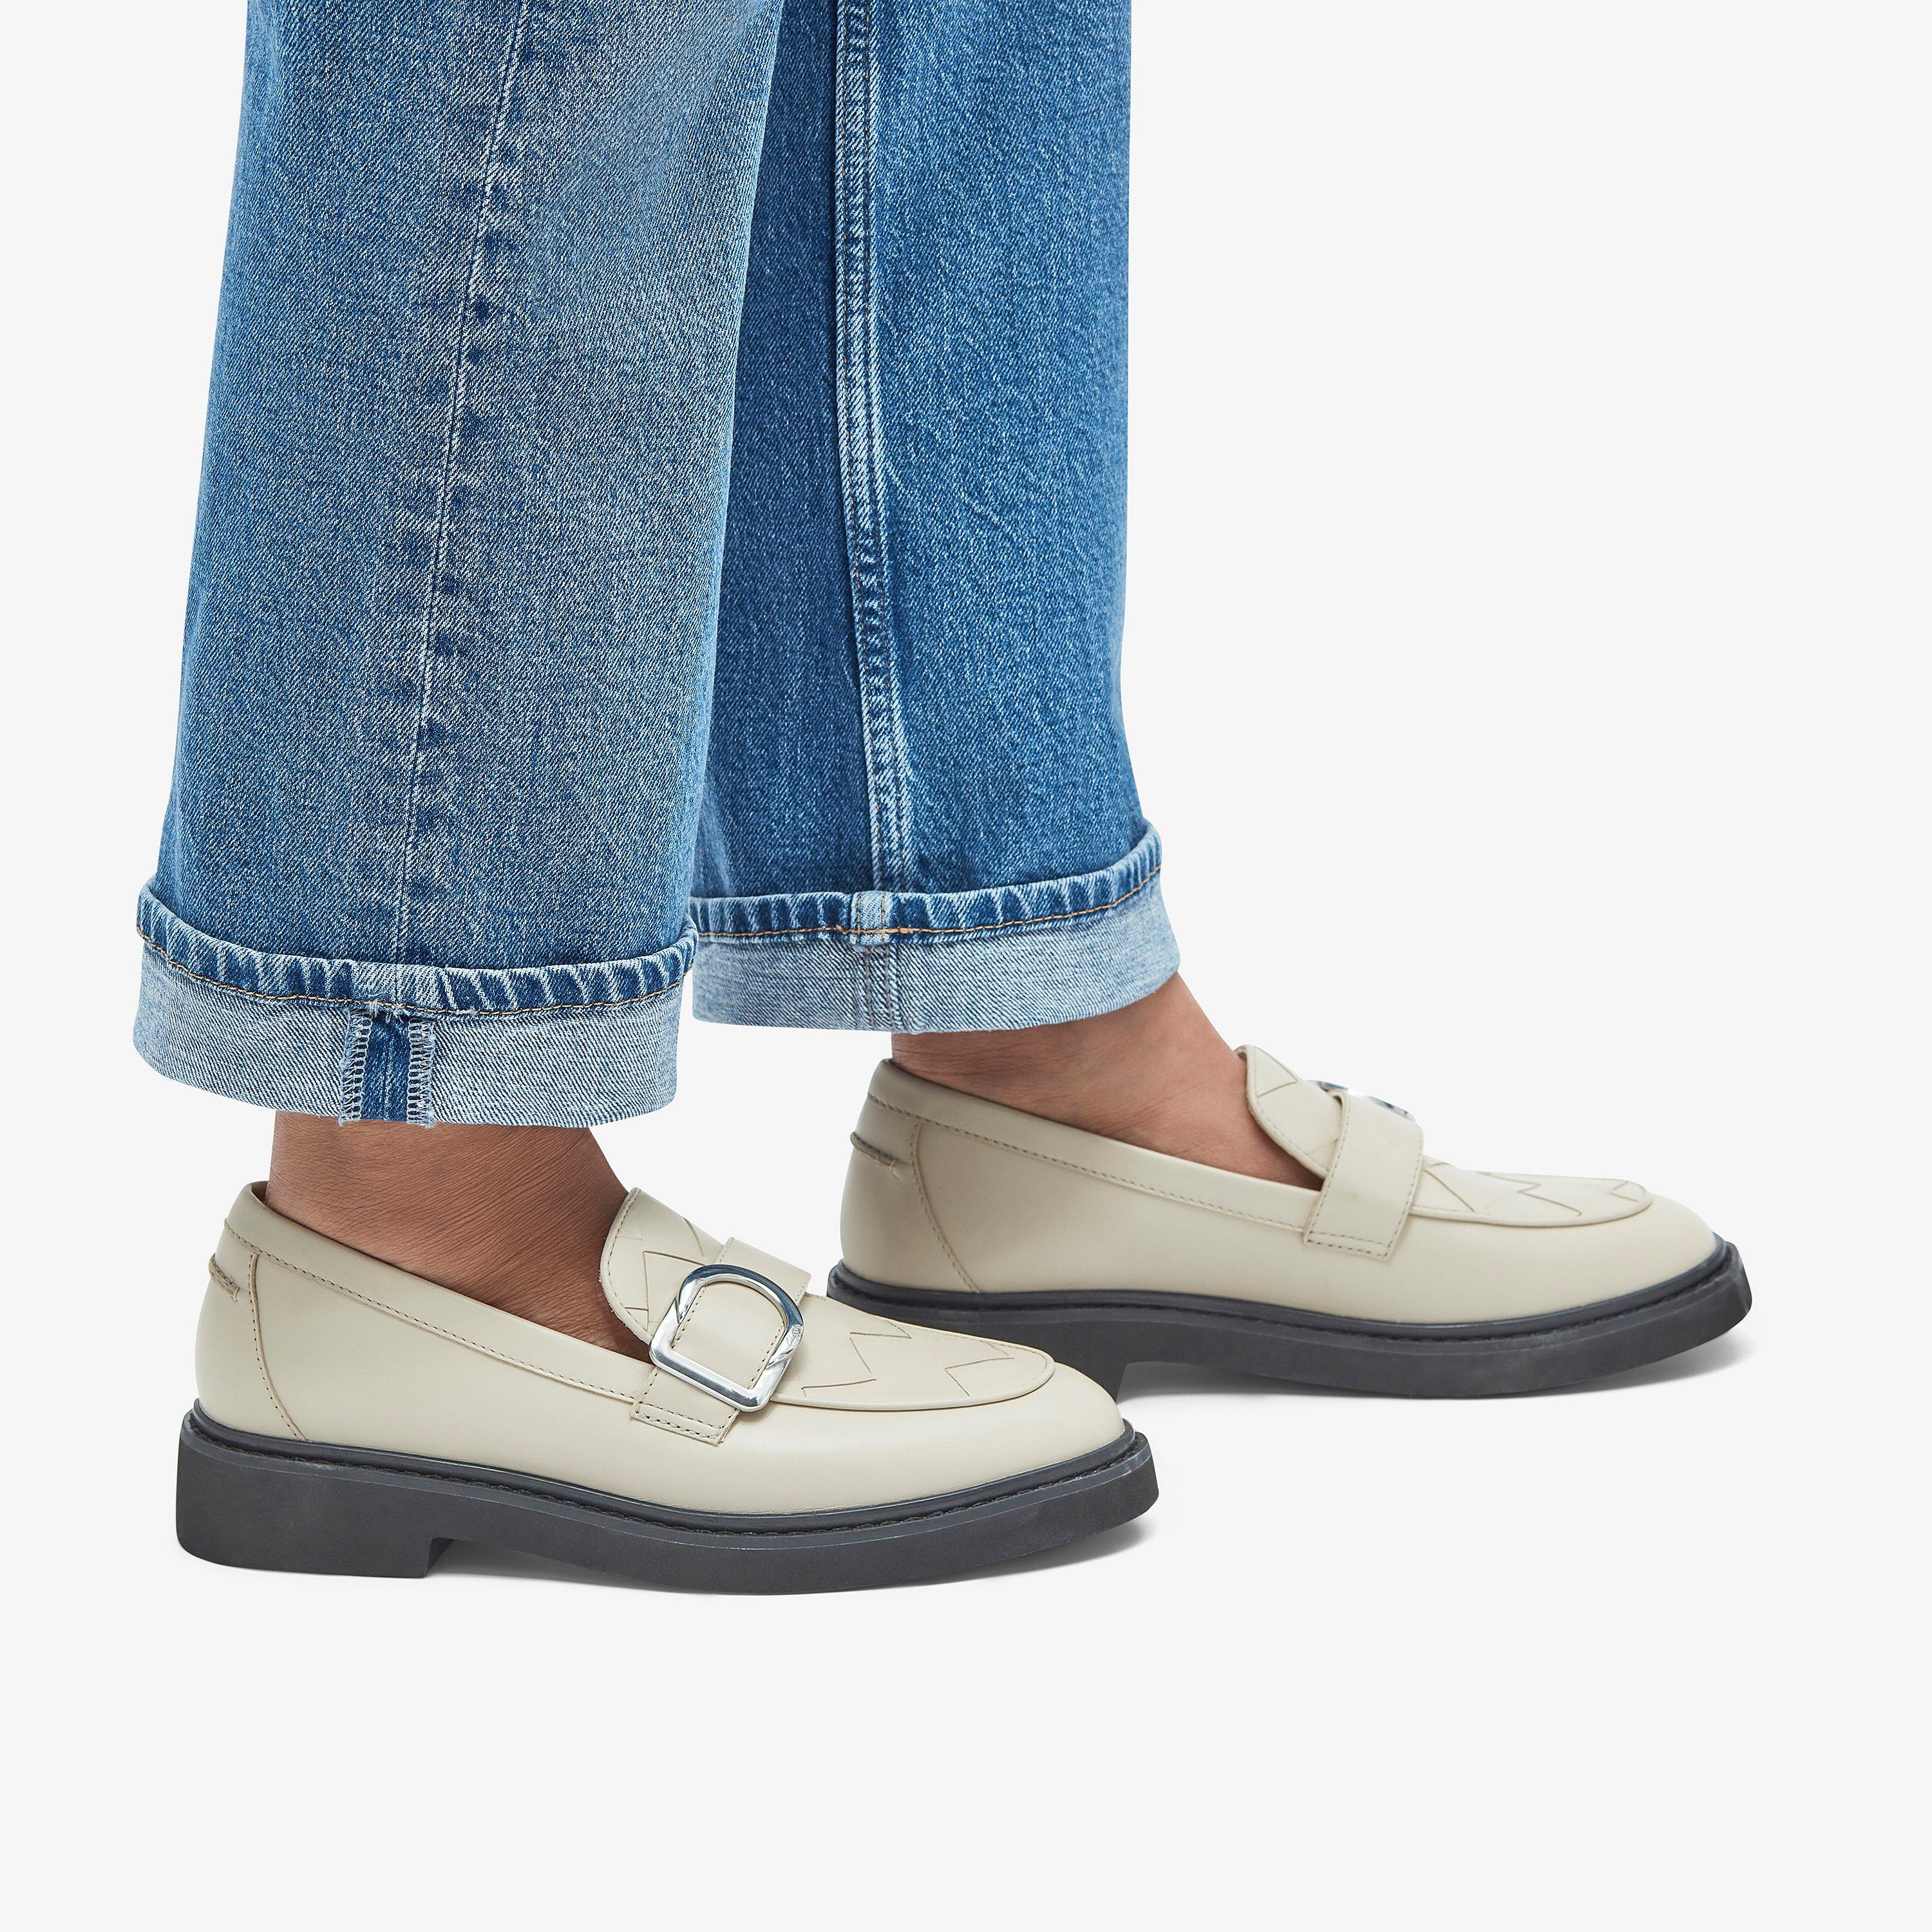 Up to 30% off New Markdowns - Shoes Clearance | Clarks US